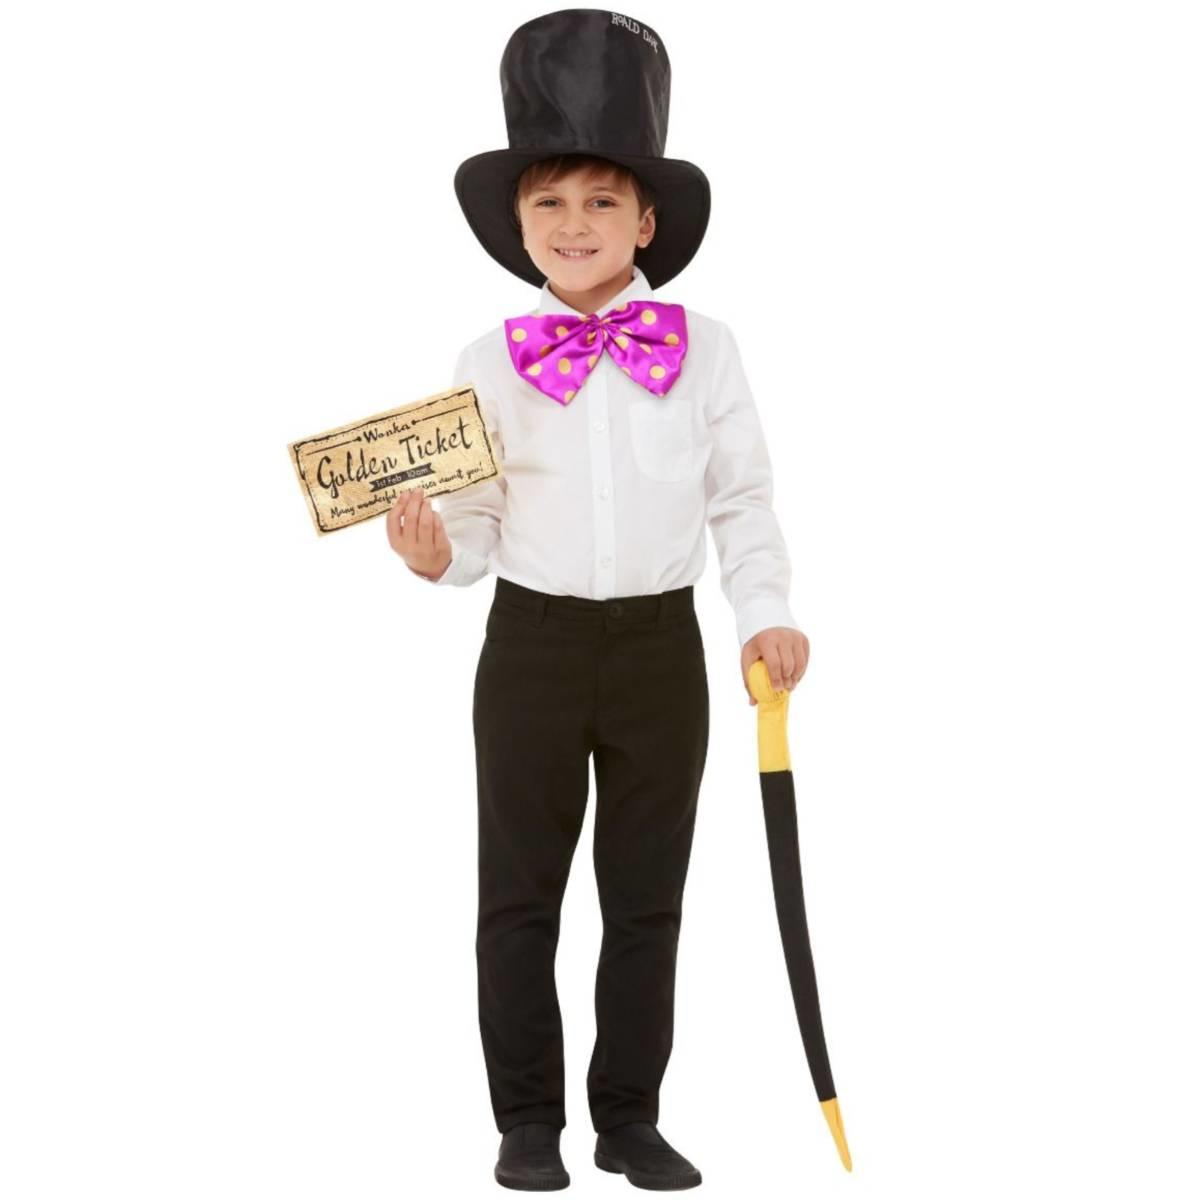 Children's Willy Wonka Costume Kit by Smiffys 50278 available here at Karnival Costumes online party shop